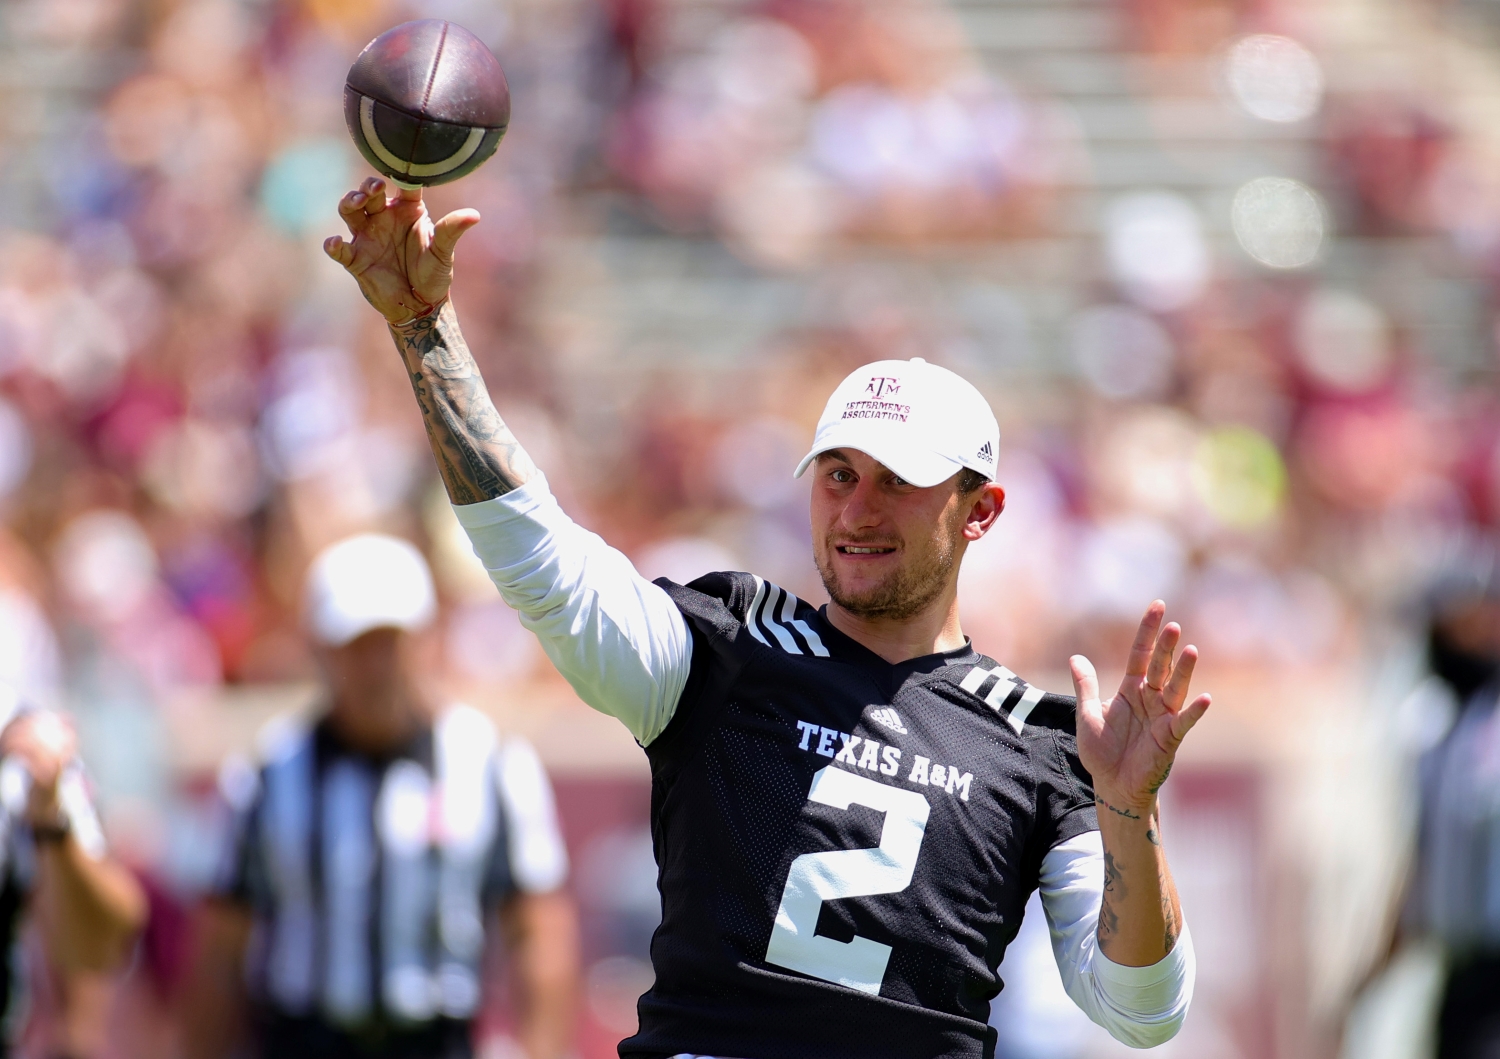 Former Heisman Trophy Winner Johnny Manziel Finally Admitted How Much He Got Paid for His Autographs in College